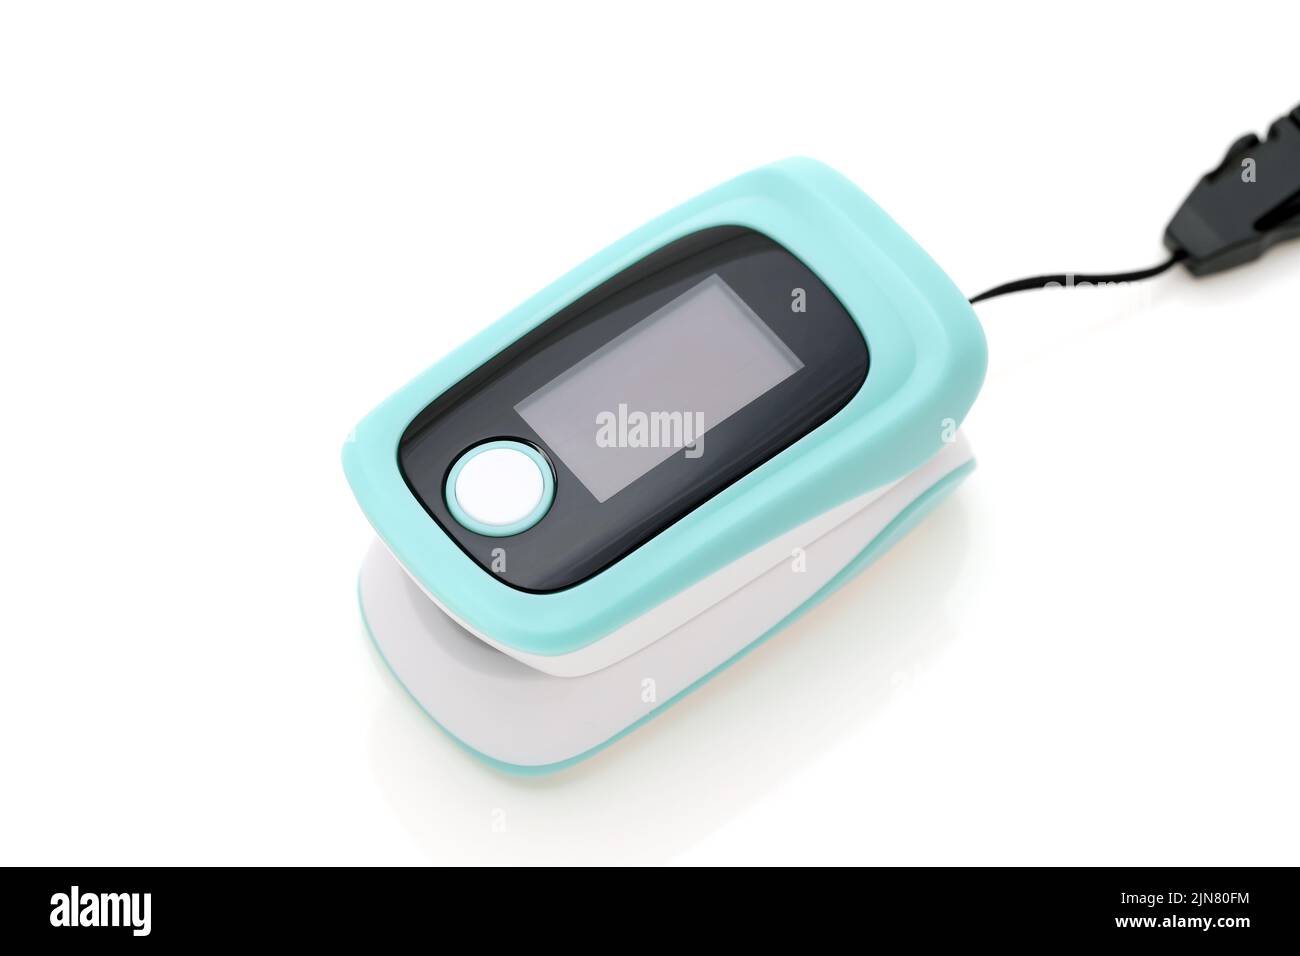 Pulse oximeter device isolated, healthcare monitoring concept Stock Photo